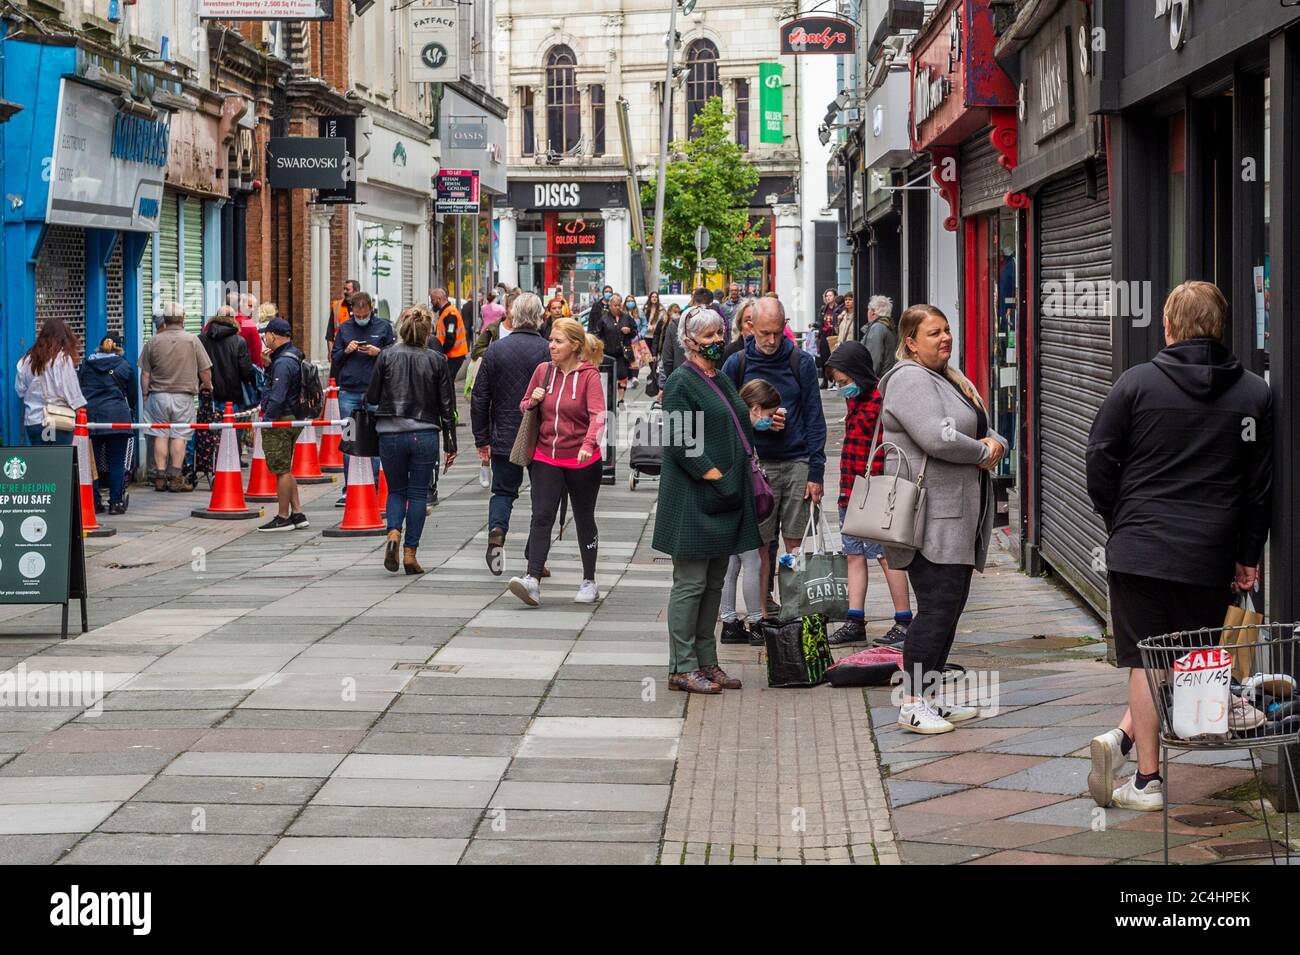 Cork, Ireland. 27th June, 2020. Cork City was busy with shoppers today, as things get back to a new normal after the Coronavirus lockdown. Credit: AG News/Alamy Live News Stock Photo